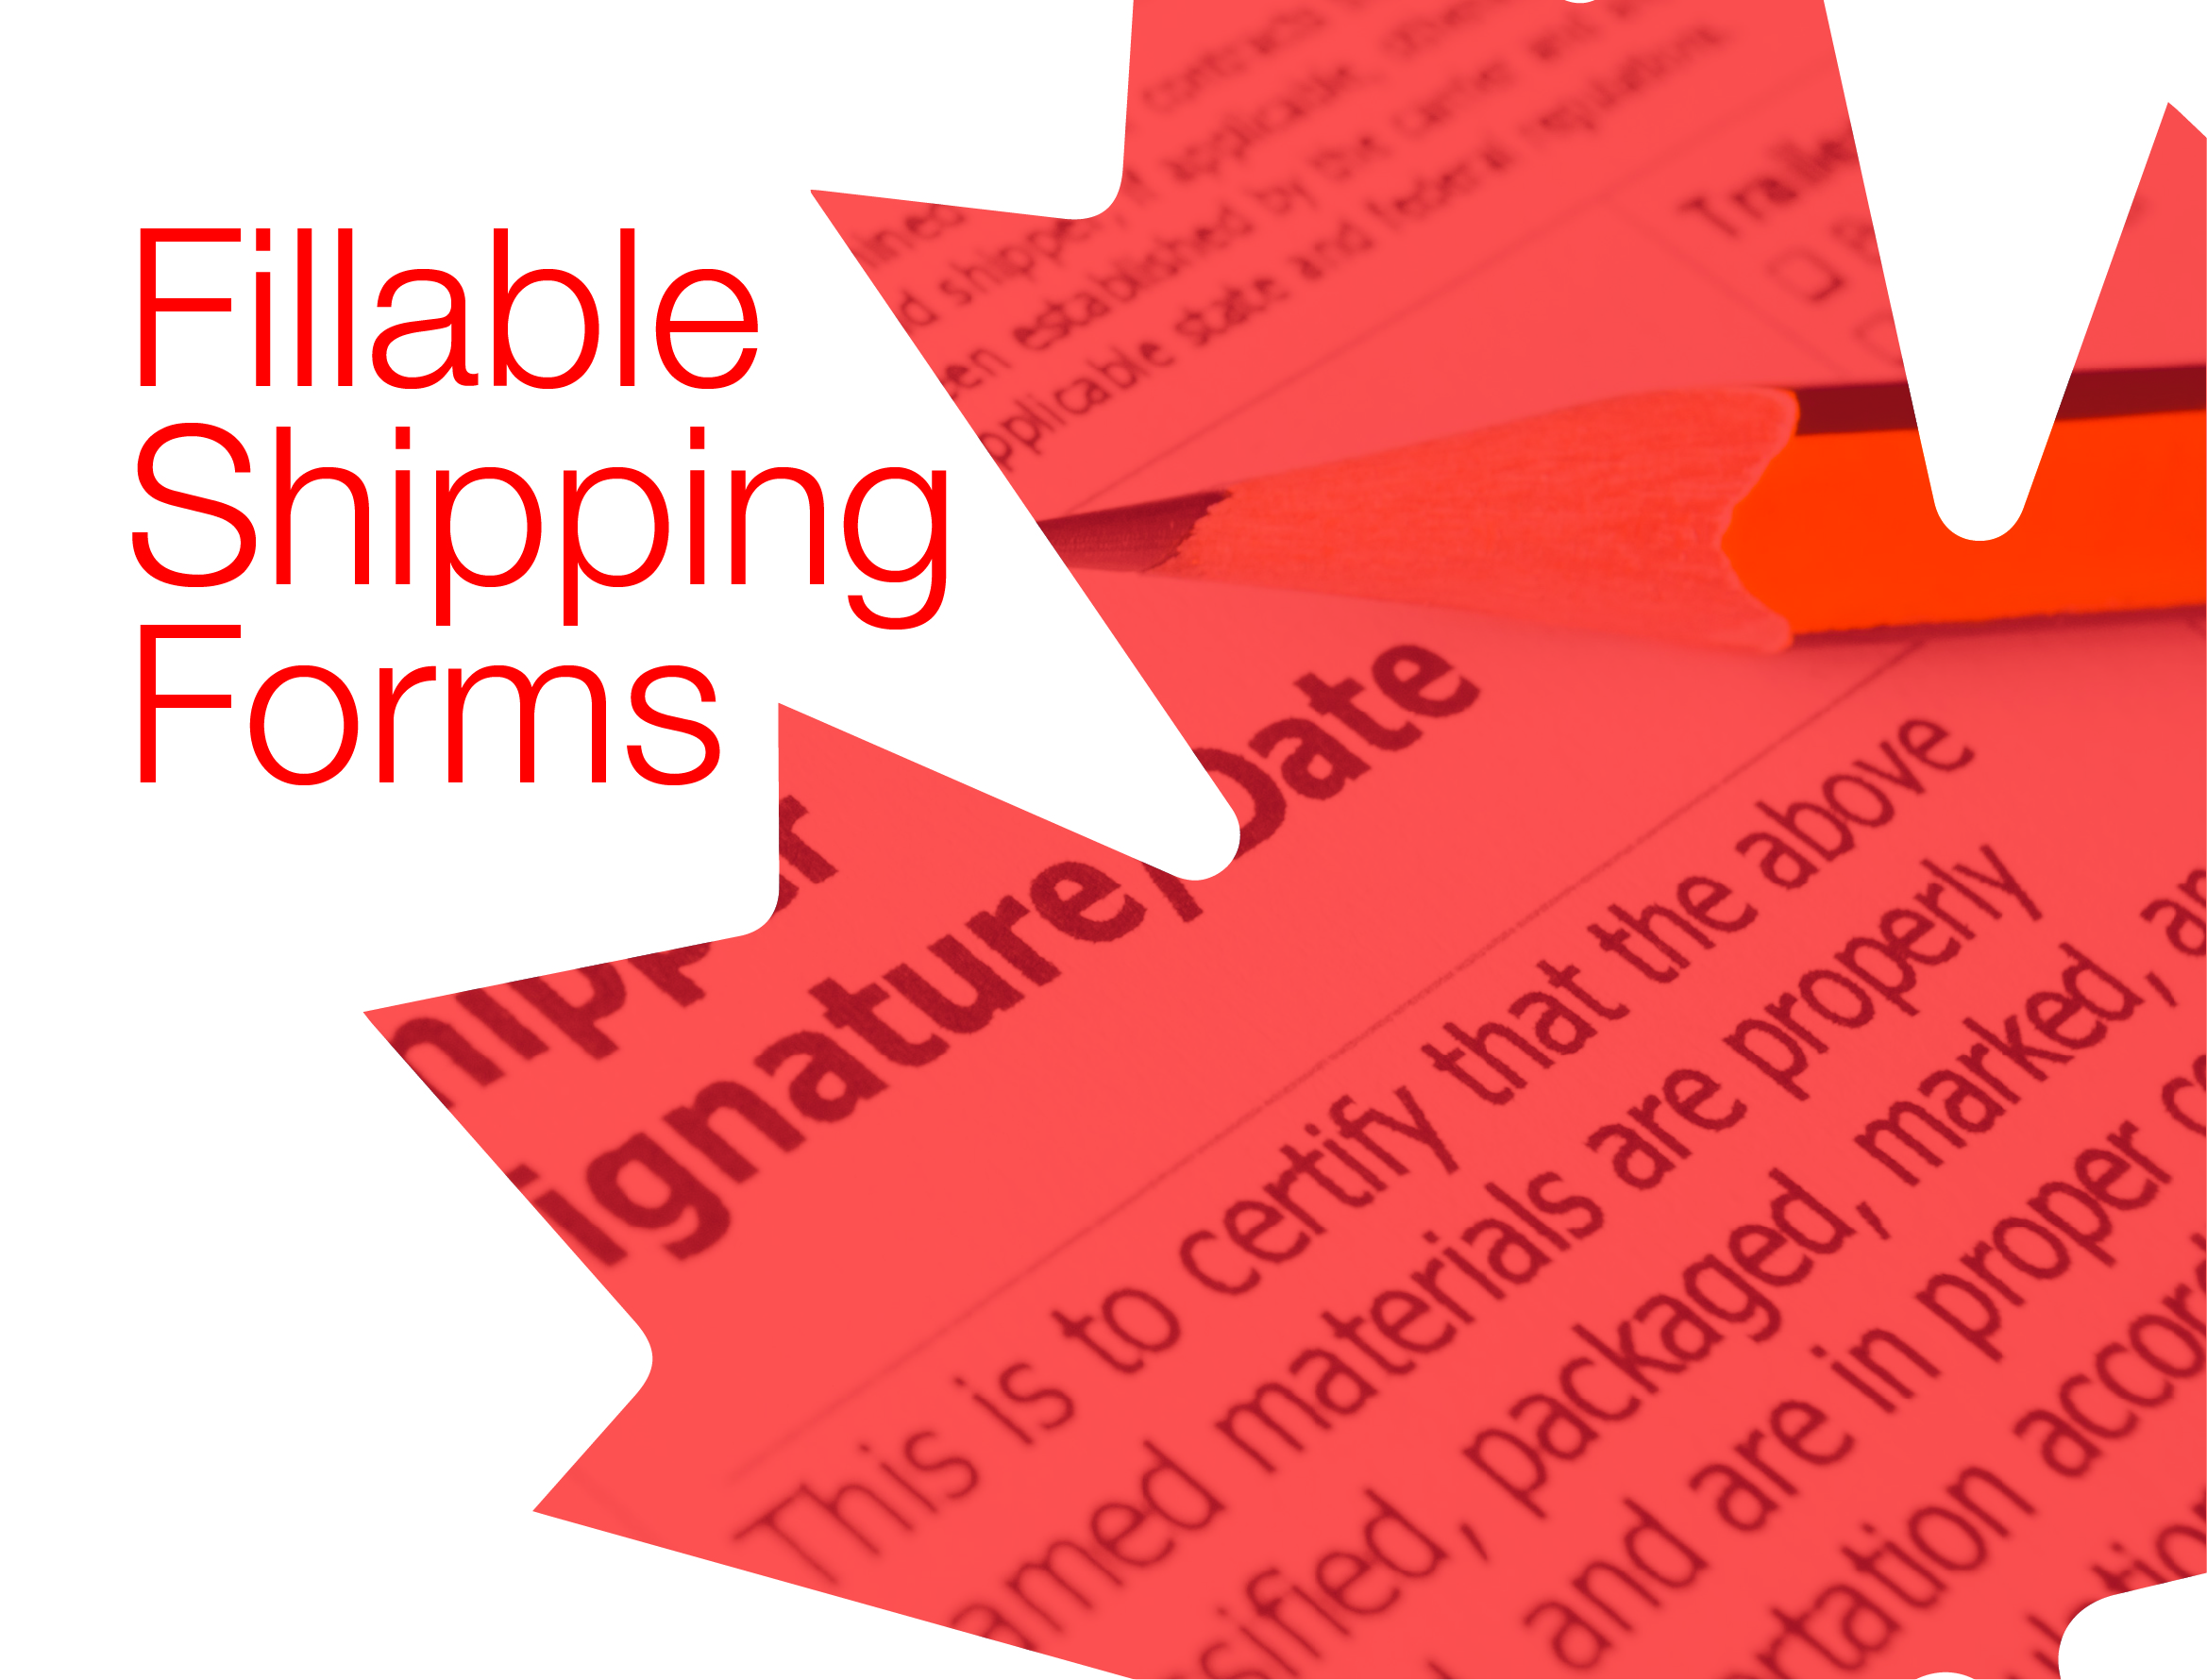 Fillable Shipping Forms